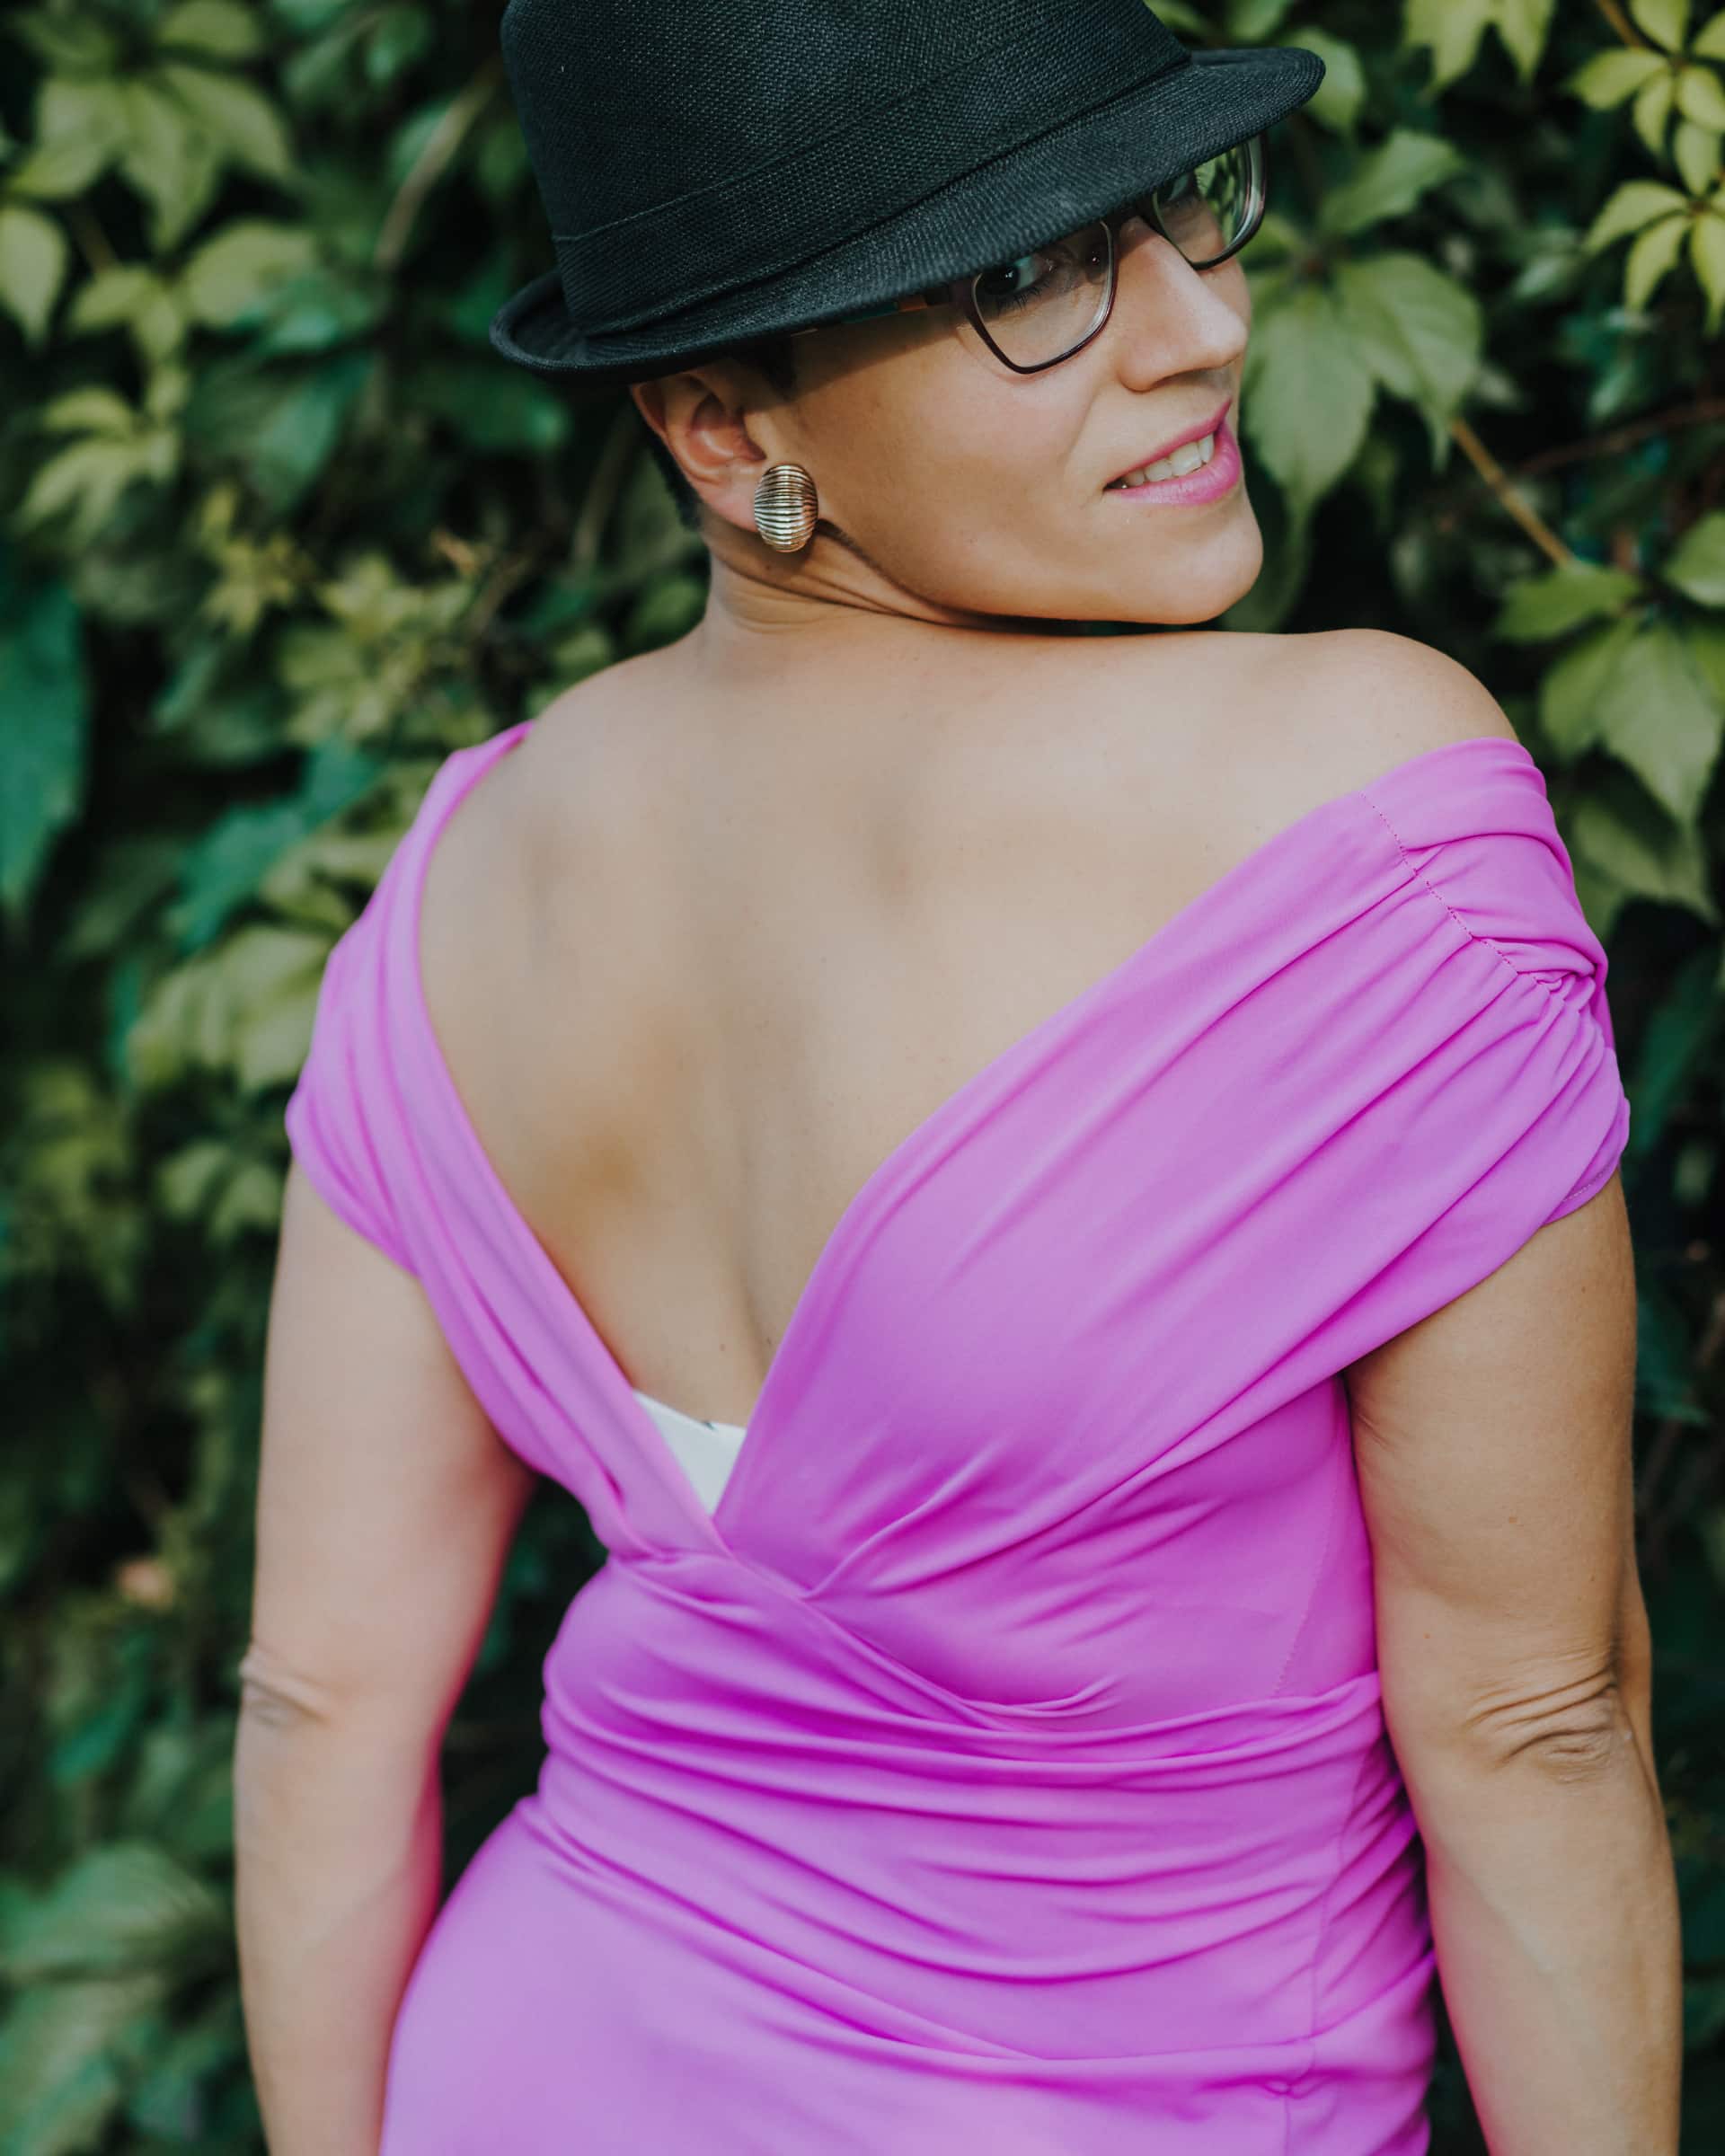 Free Picture Good Looking Woman In Hat And Purple Dress Smiling